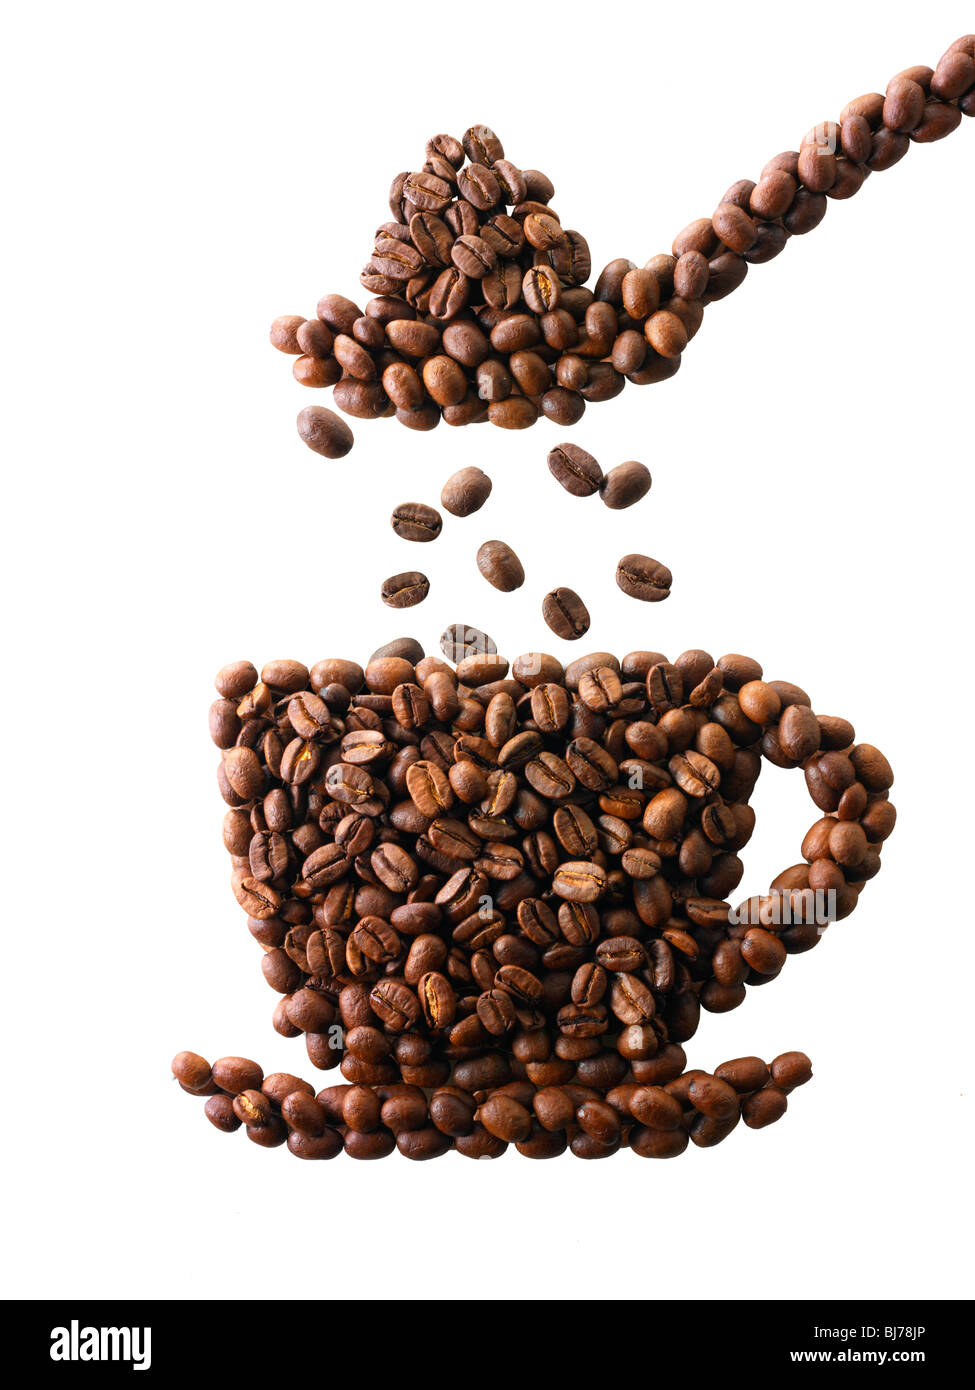 Coffee beans in the shape of a coffee cup. Stock Photo Stock Photo